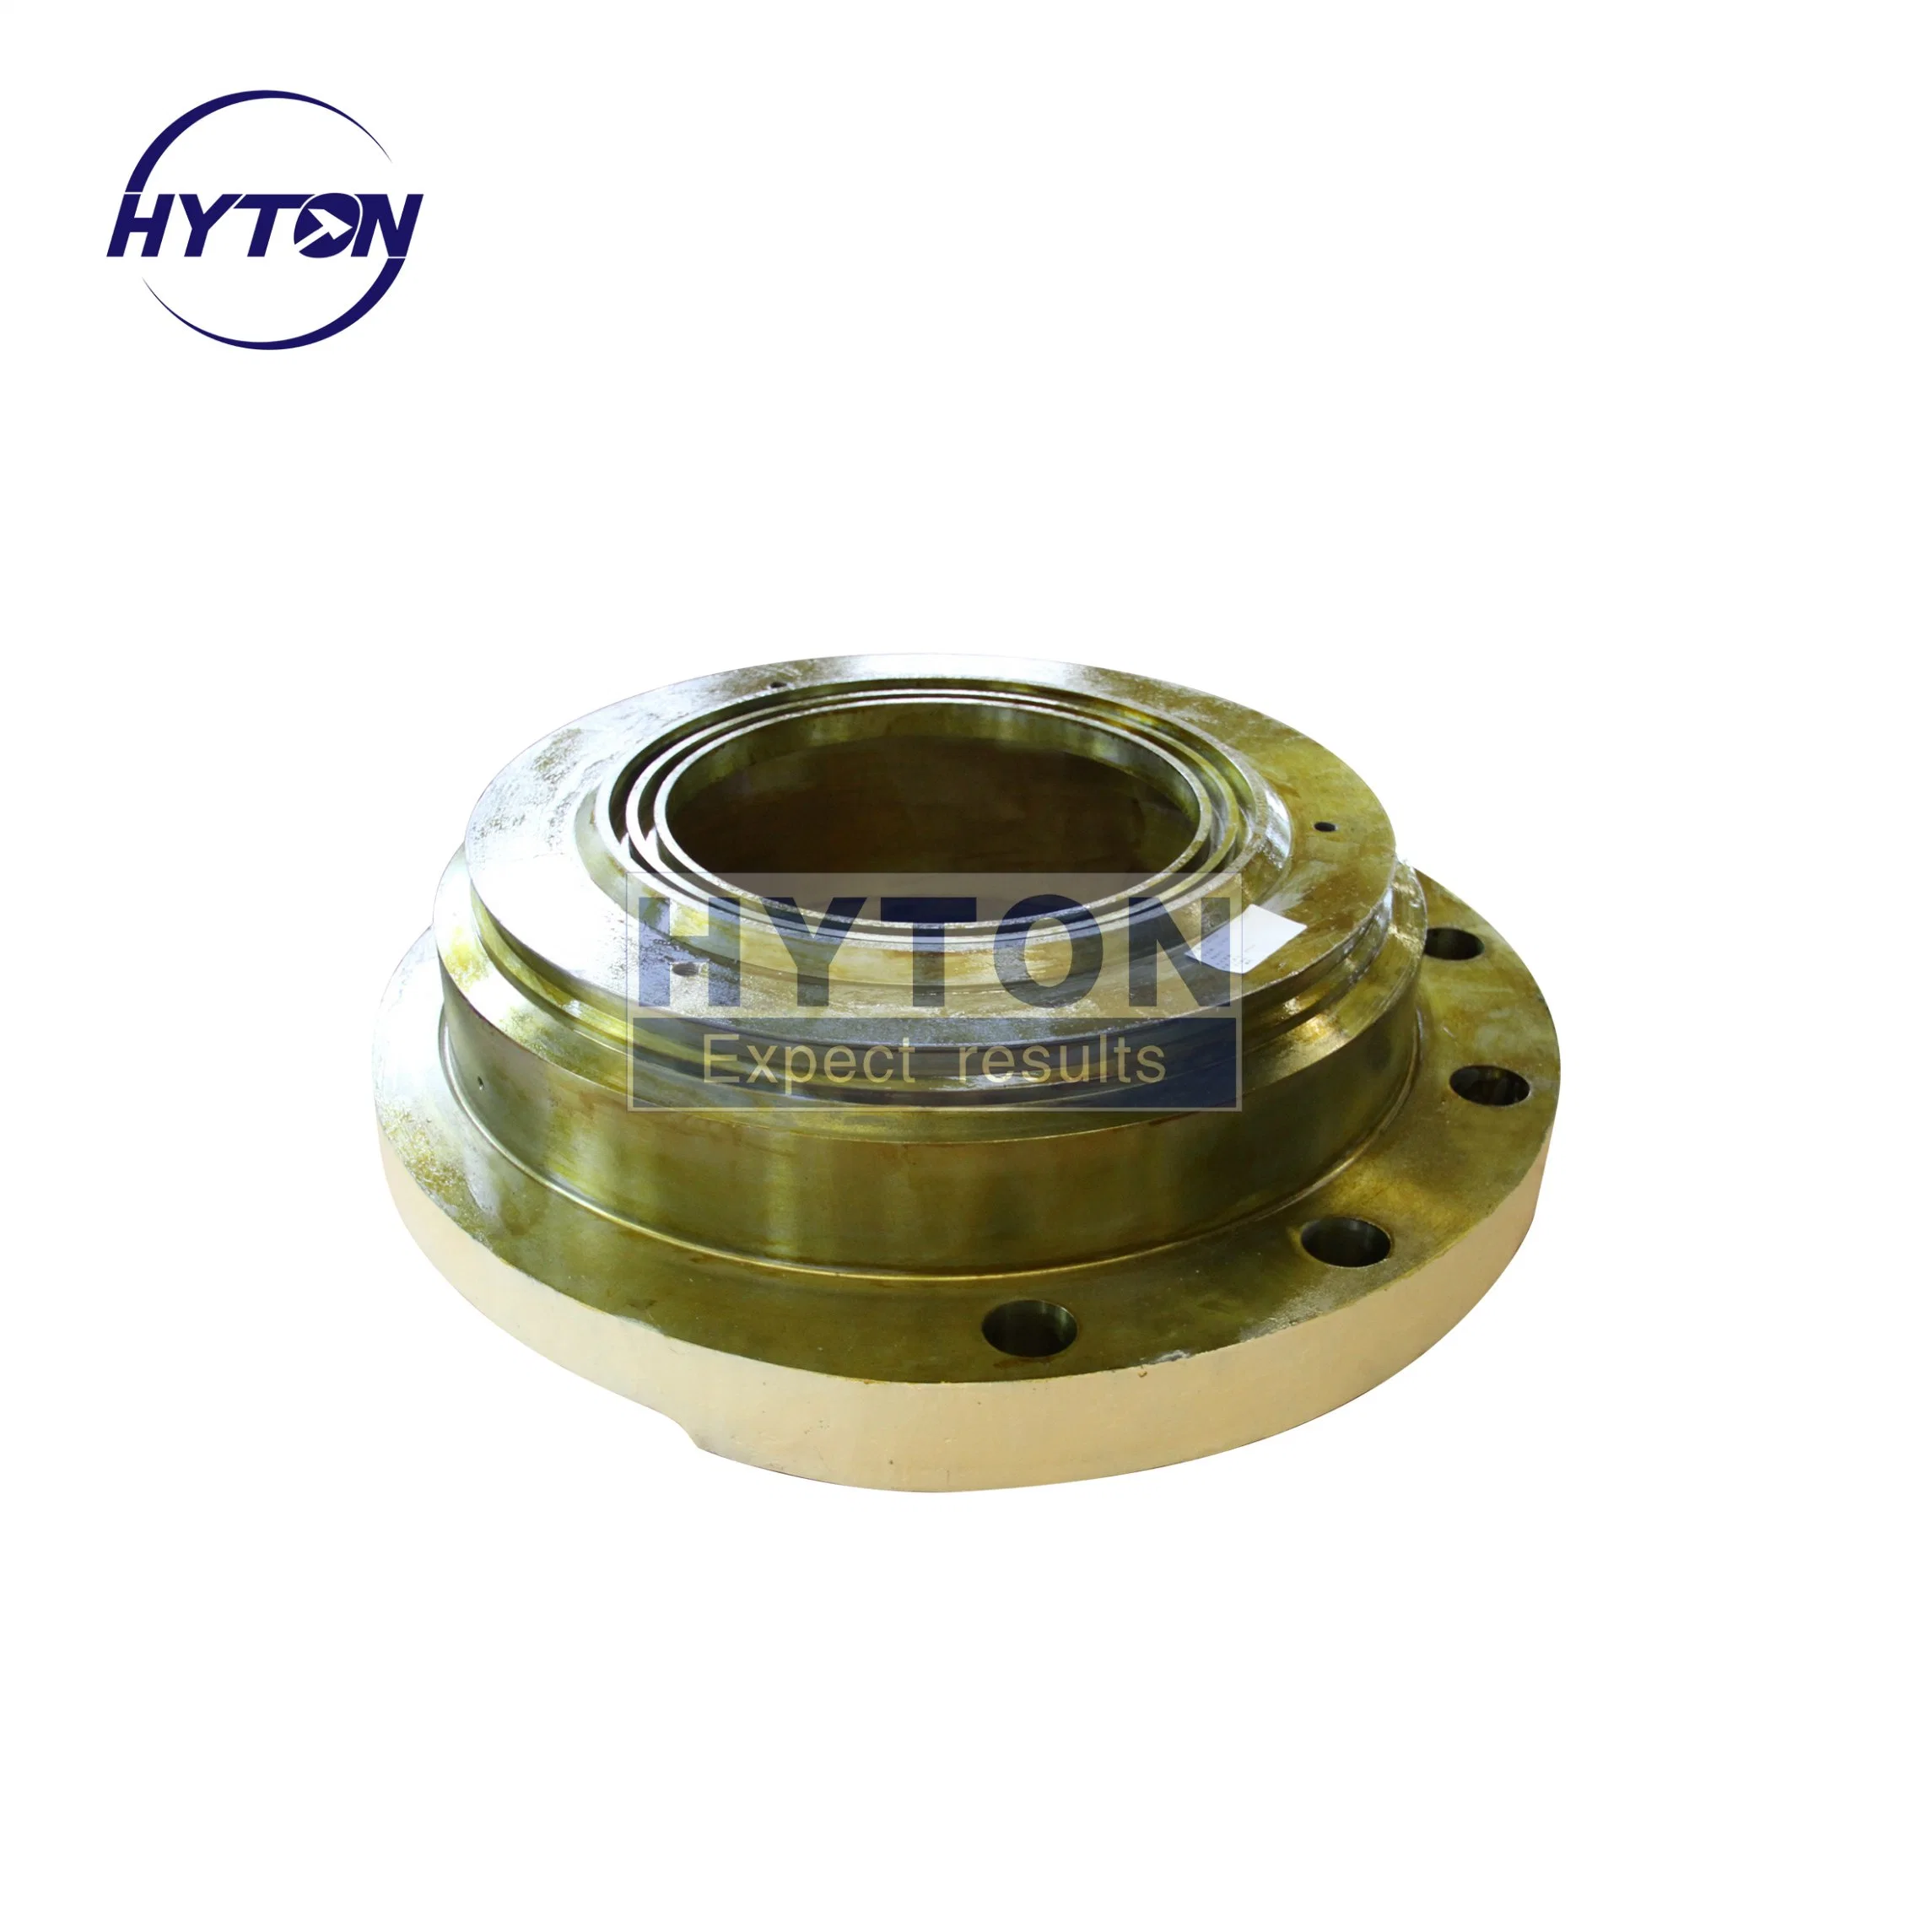 Hyton Stone Crusher Spare Parts Bearing Housing Suit C120 Jaw Crusher Accessories